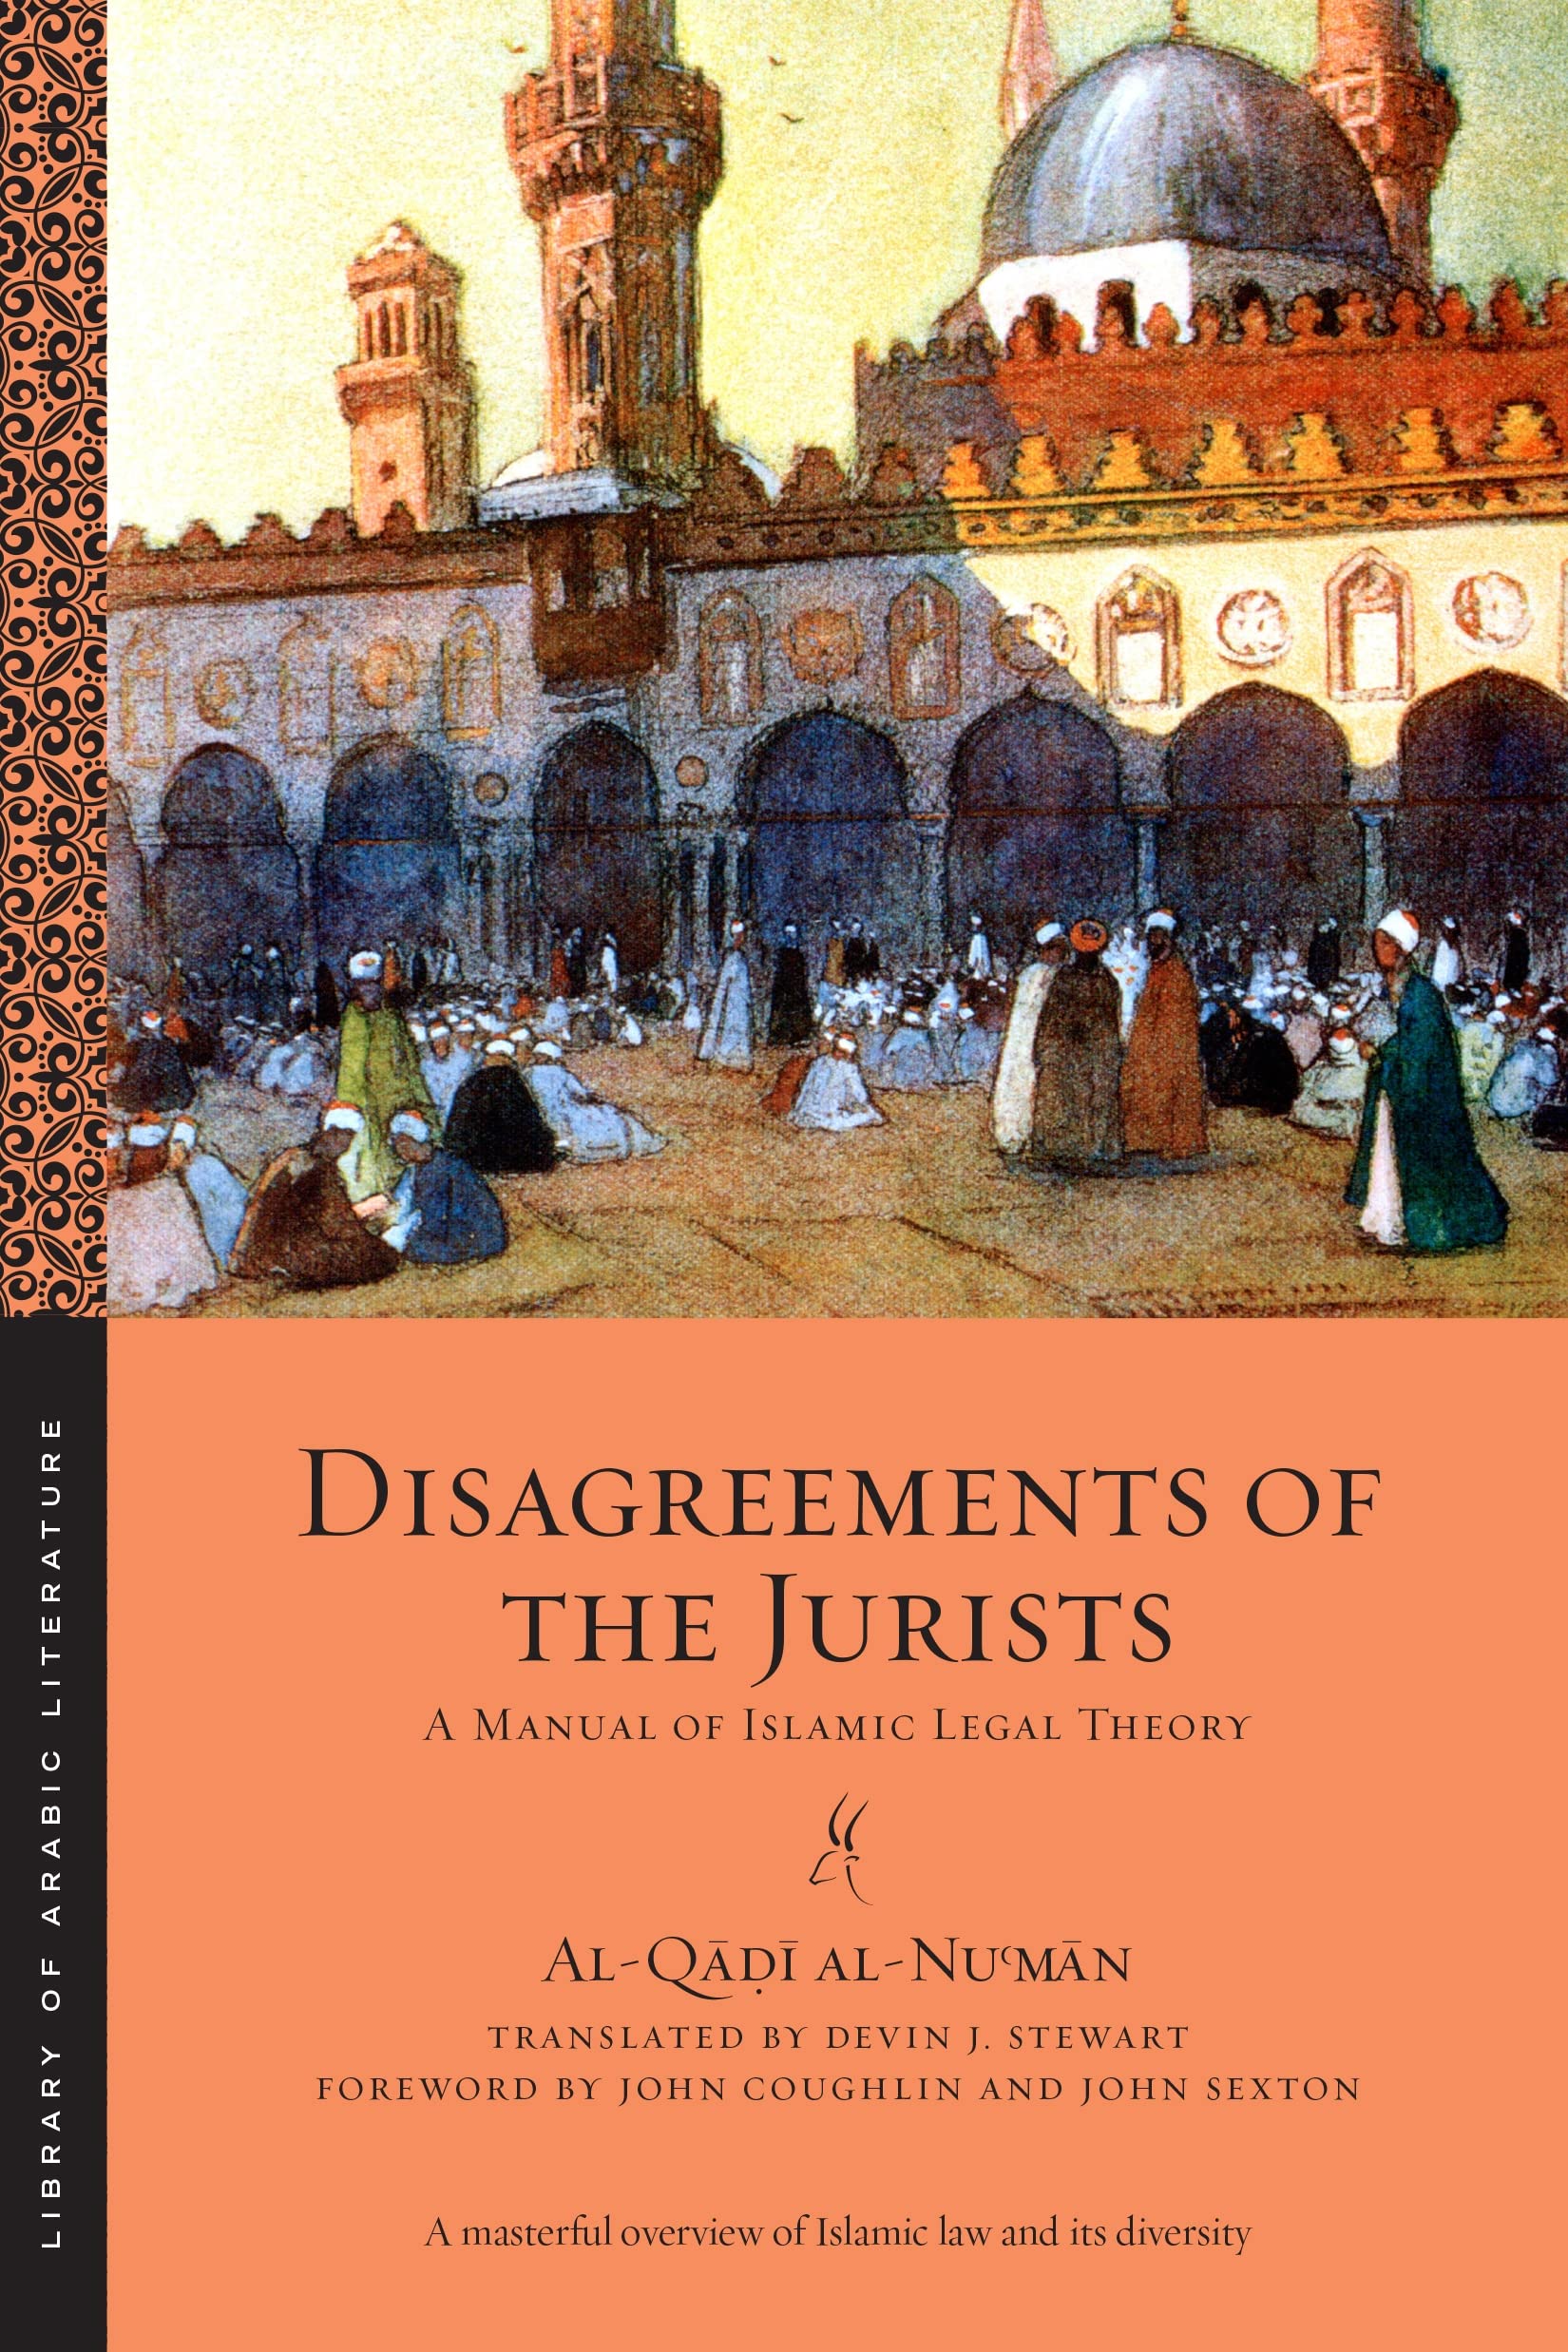 Disagreements of the Jurists: A Manual of Islamic Legal Theory